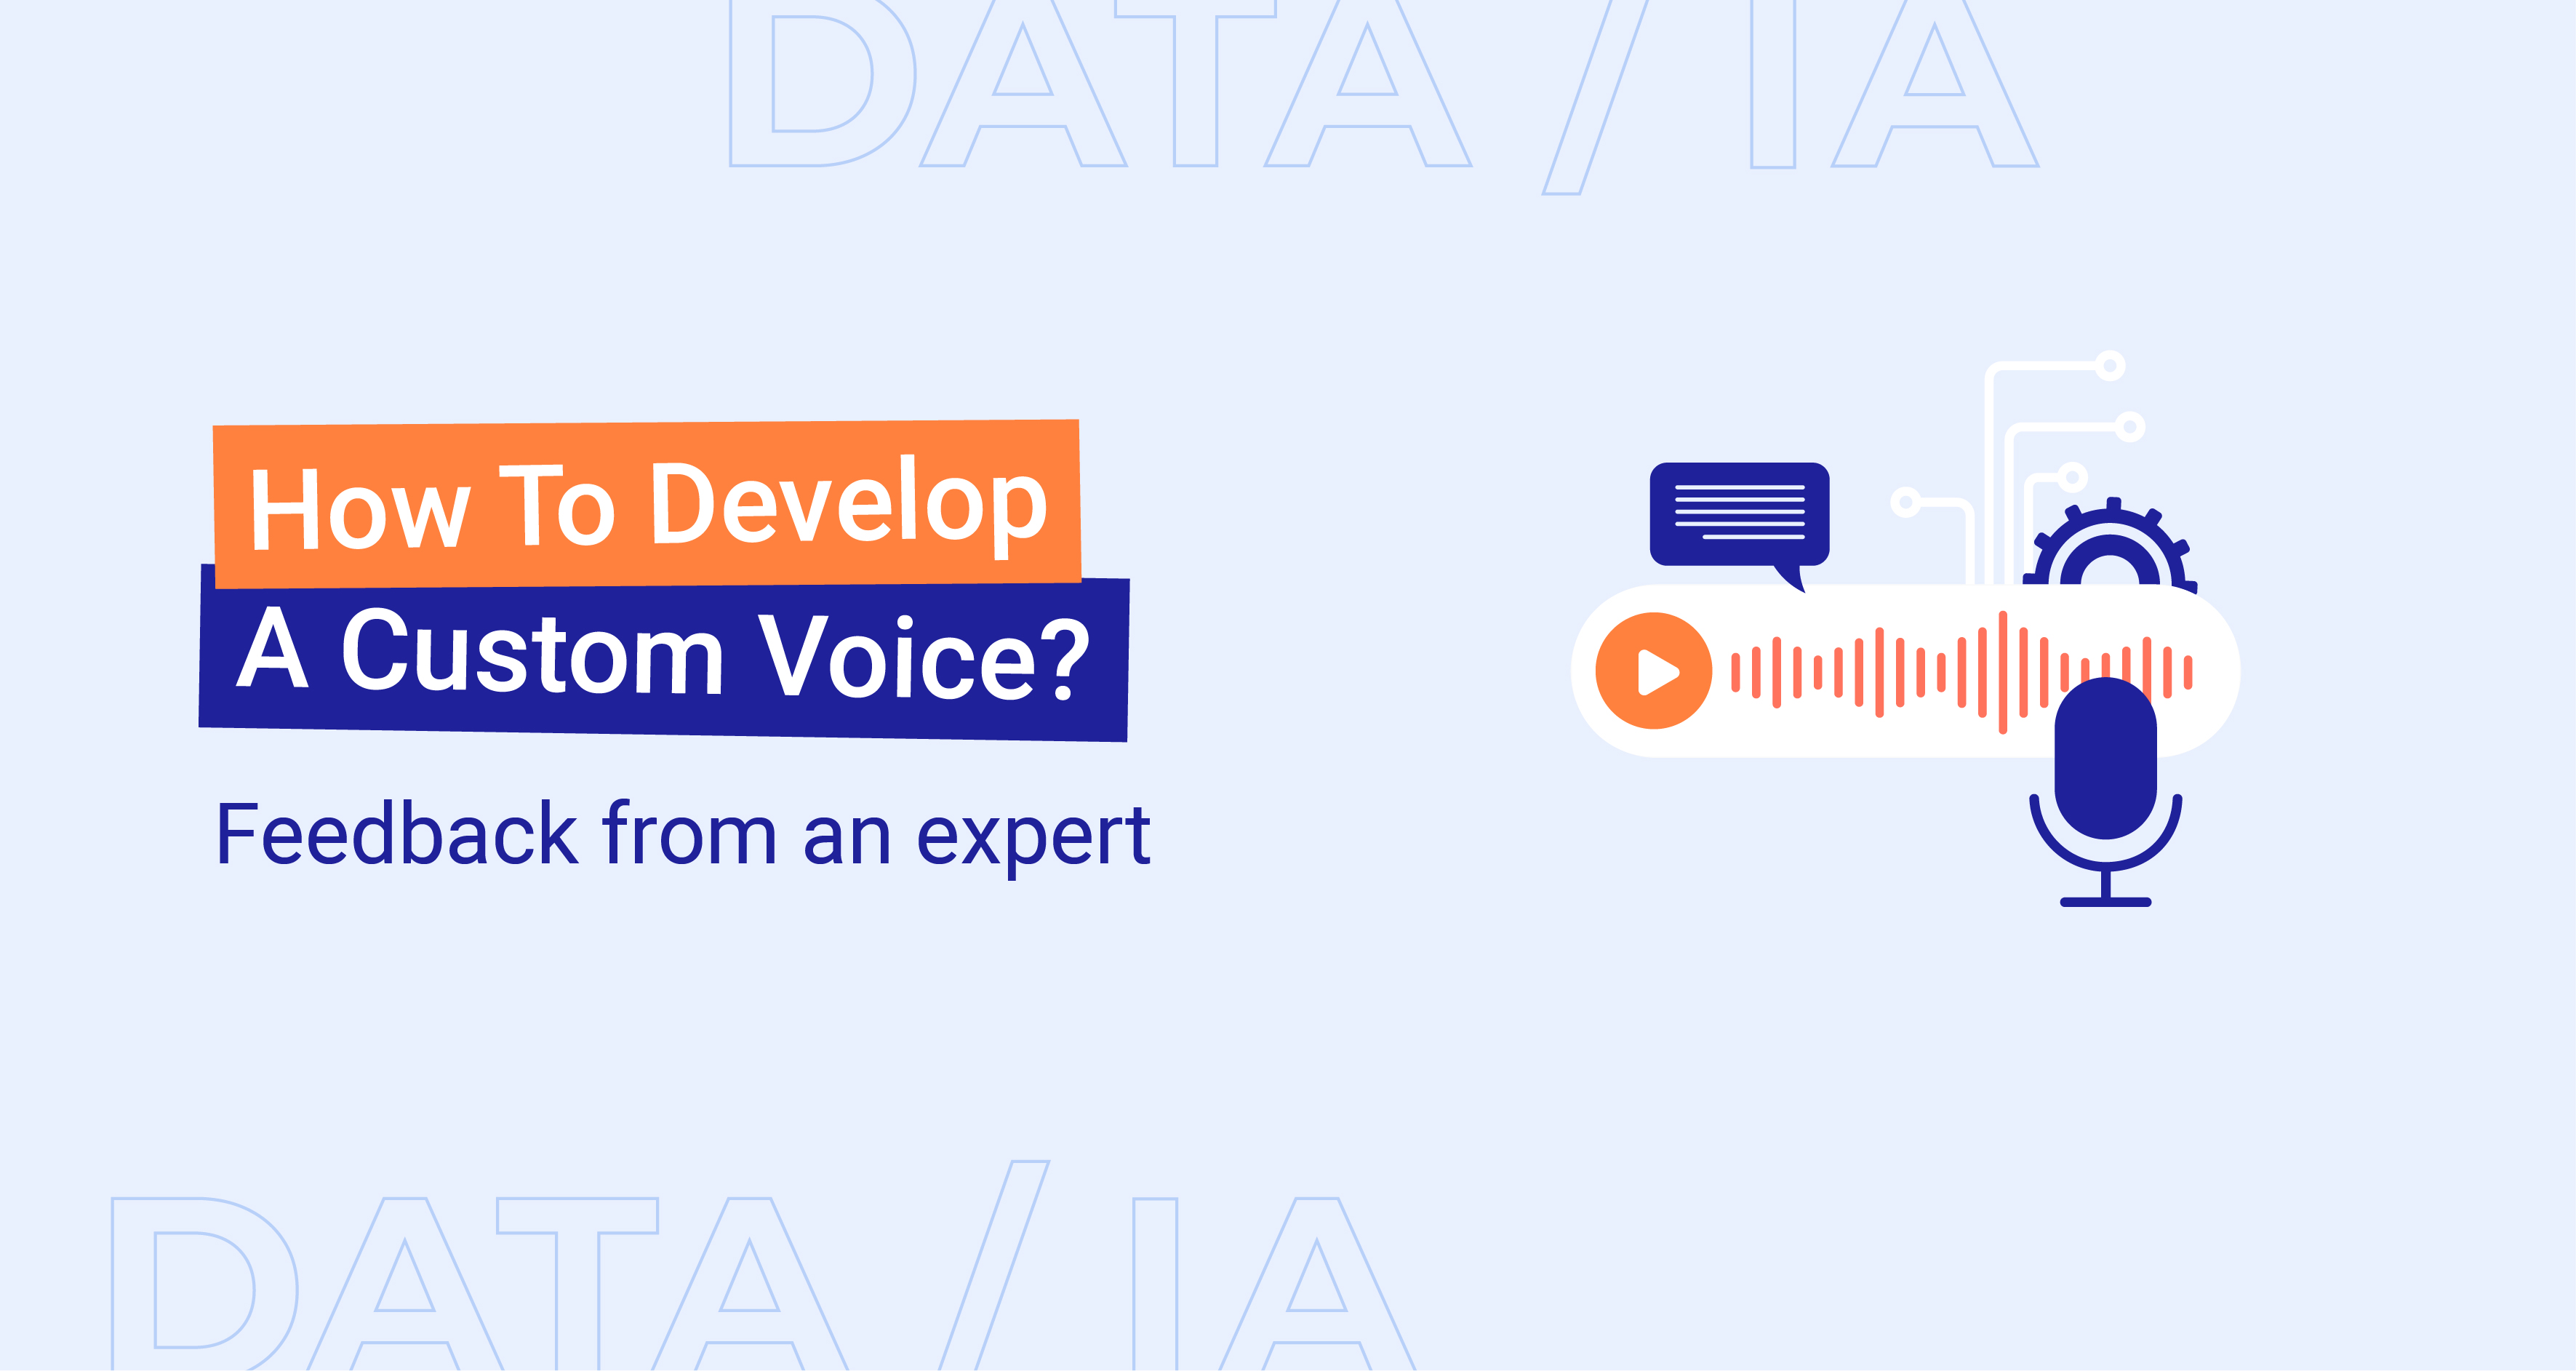 How To Develop A Custom Voice? Feedback from an expert